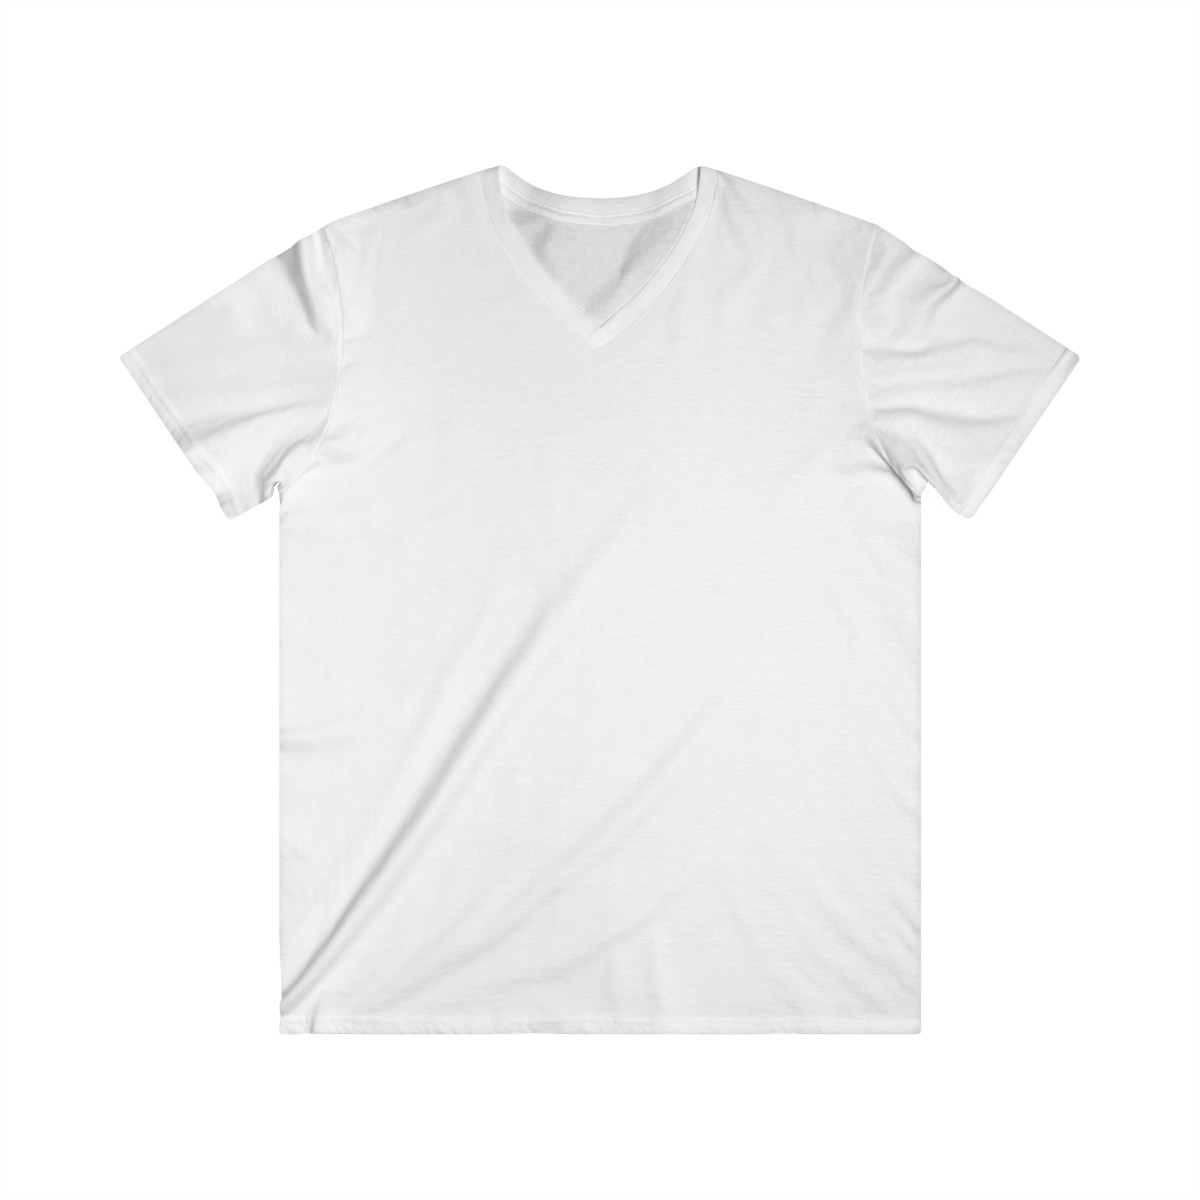 𝓟𝓻𝓲𝓷𝓬𝓮 𝓣𝓻𝓲𝓫𝓾𝓽𝓮 𝓕𝓲𝓷𝓪𝓵𝓮 Men's Fitted V-Neck Tee product thumbnail image